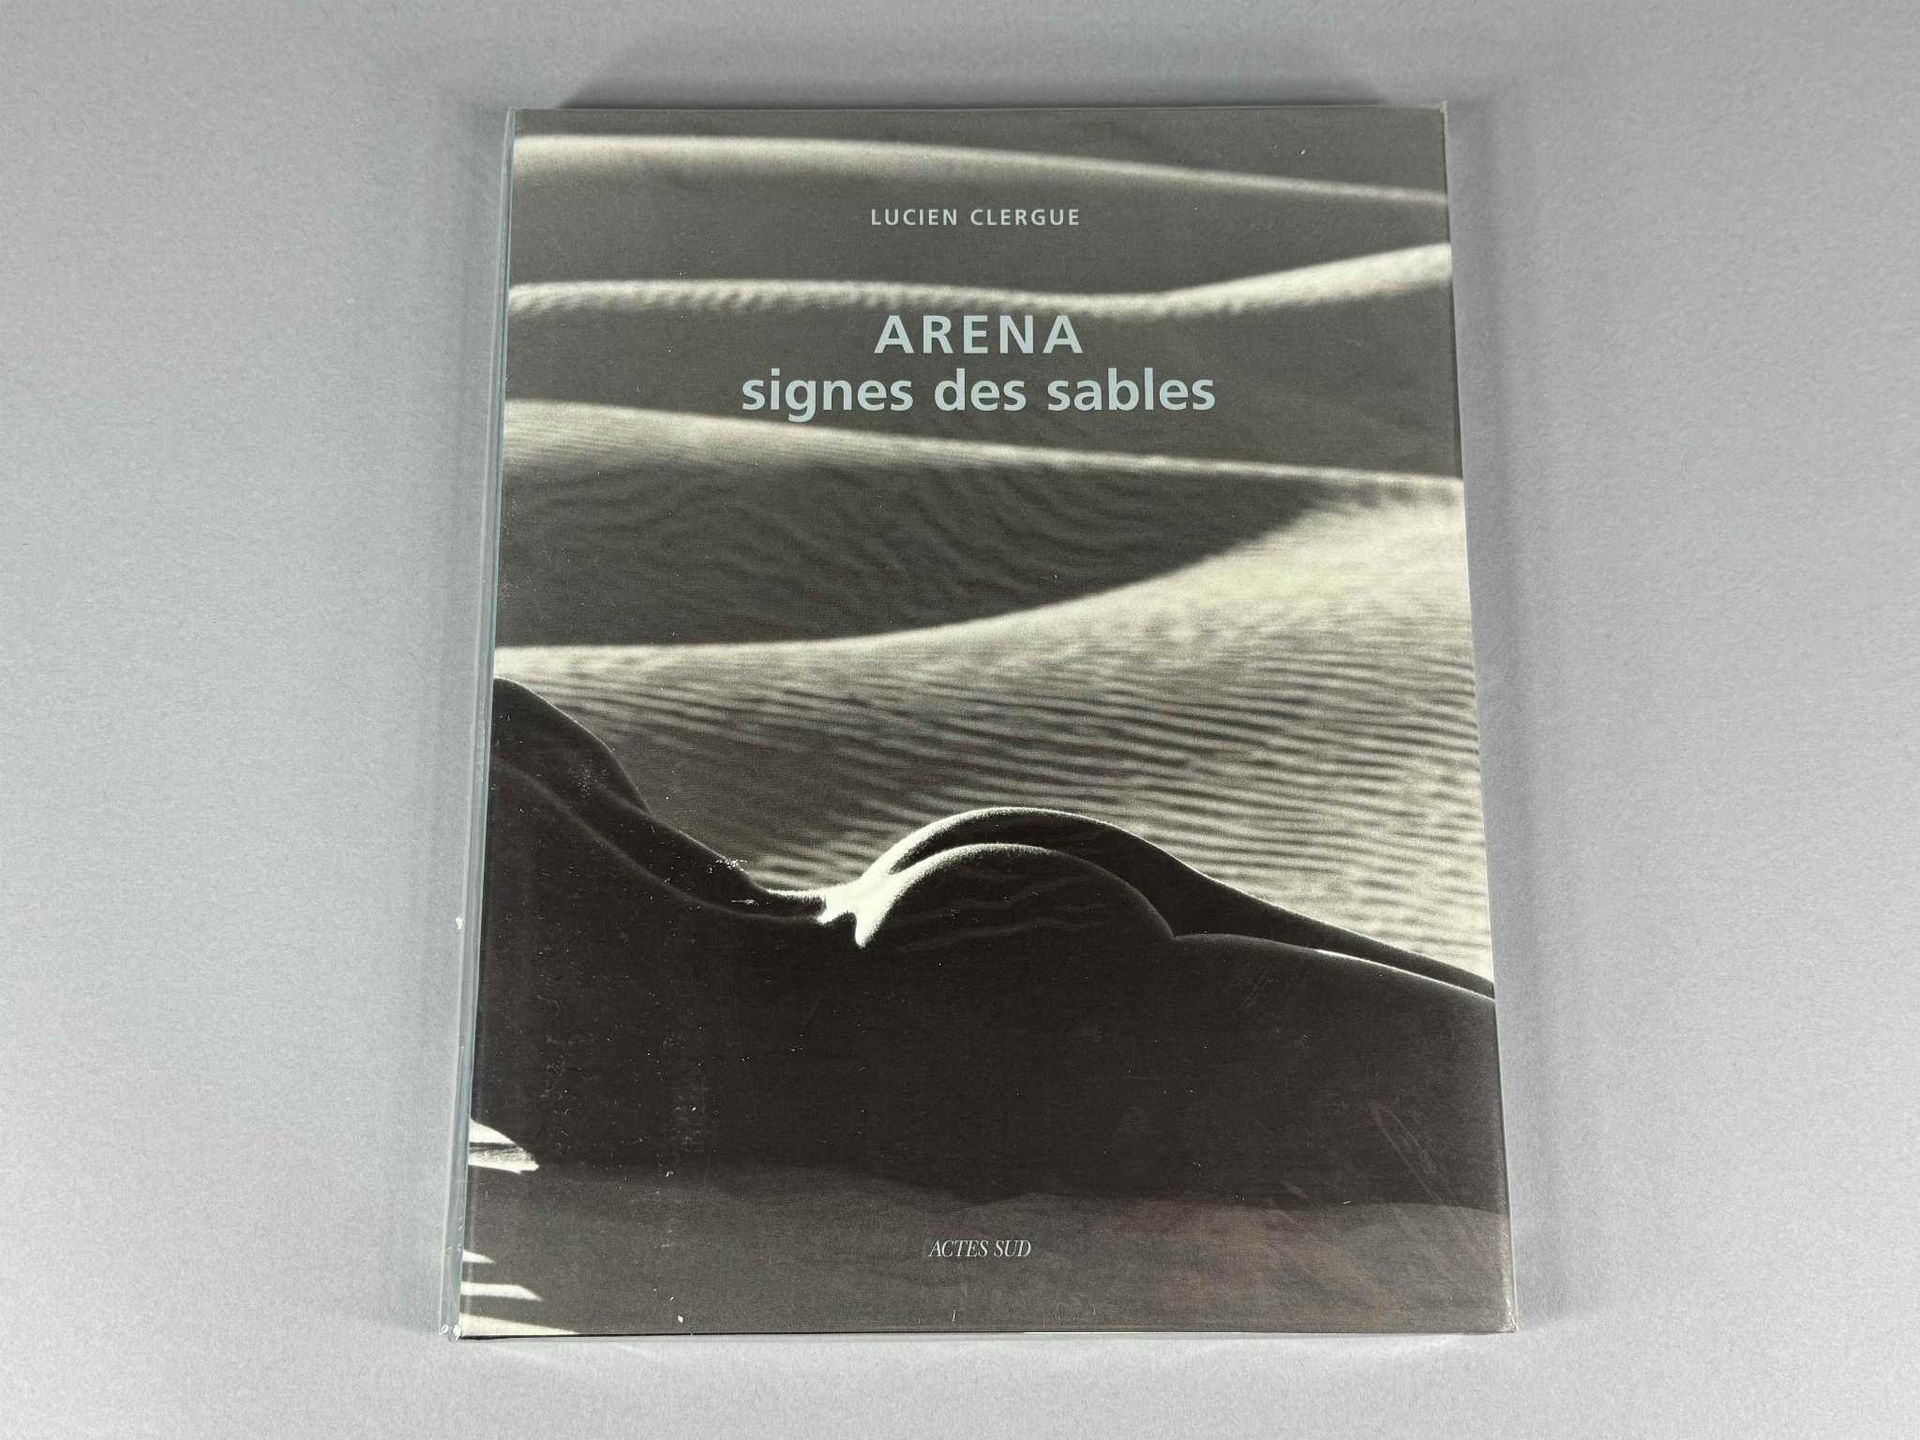 Null 吕西安-克莱格（1934-2014）。签名本。Arena, sign of the sands.Actes Sud. 2001.完好无损。